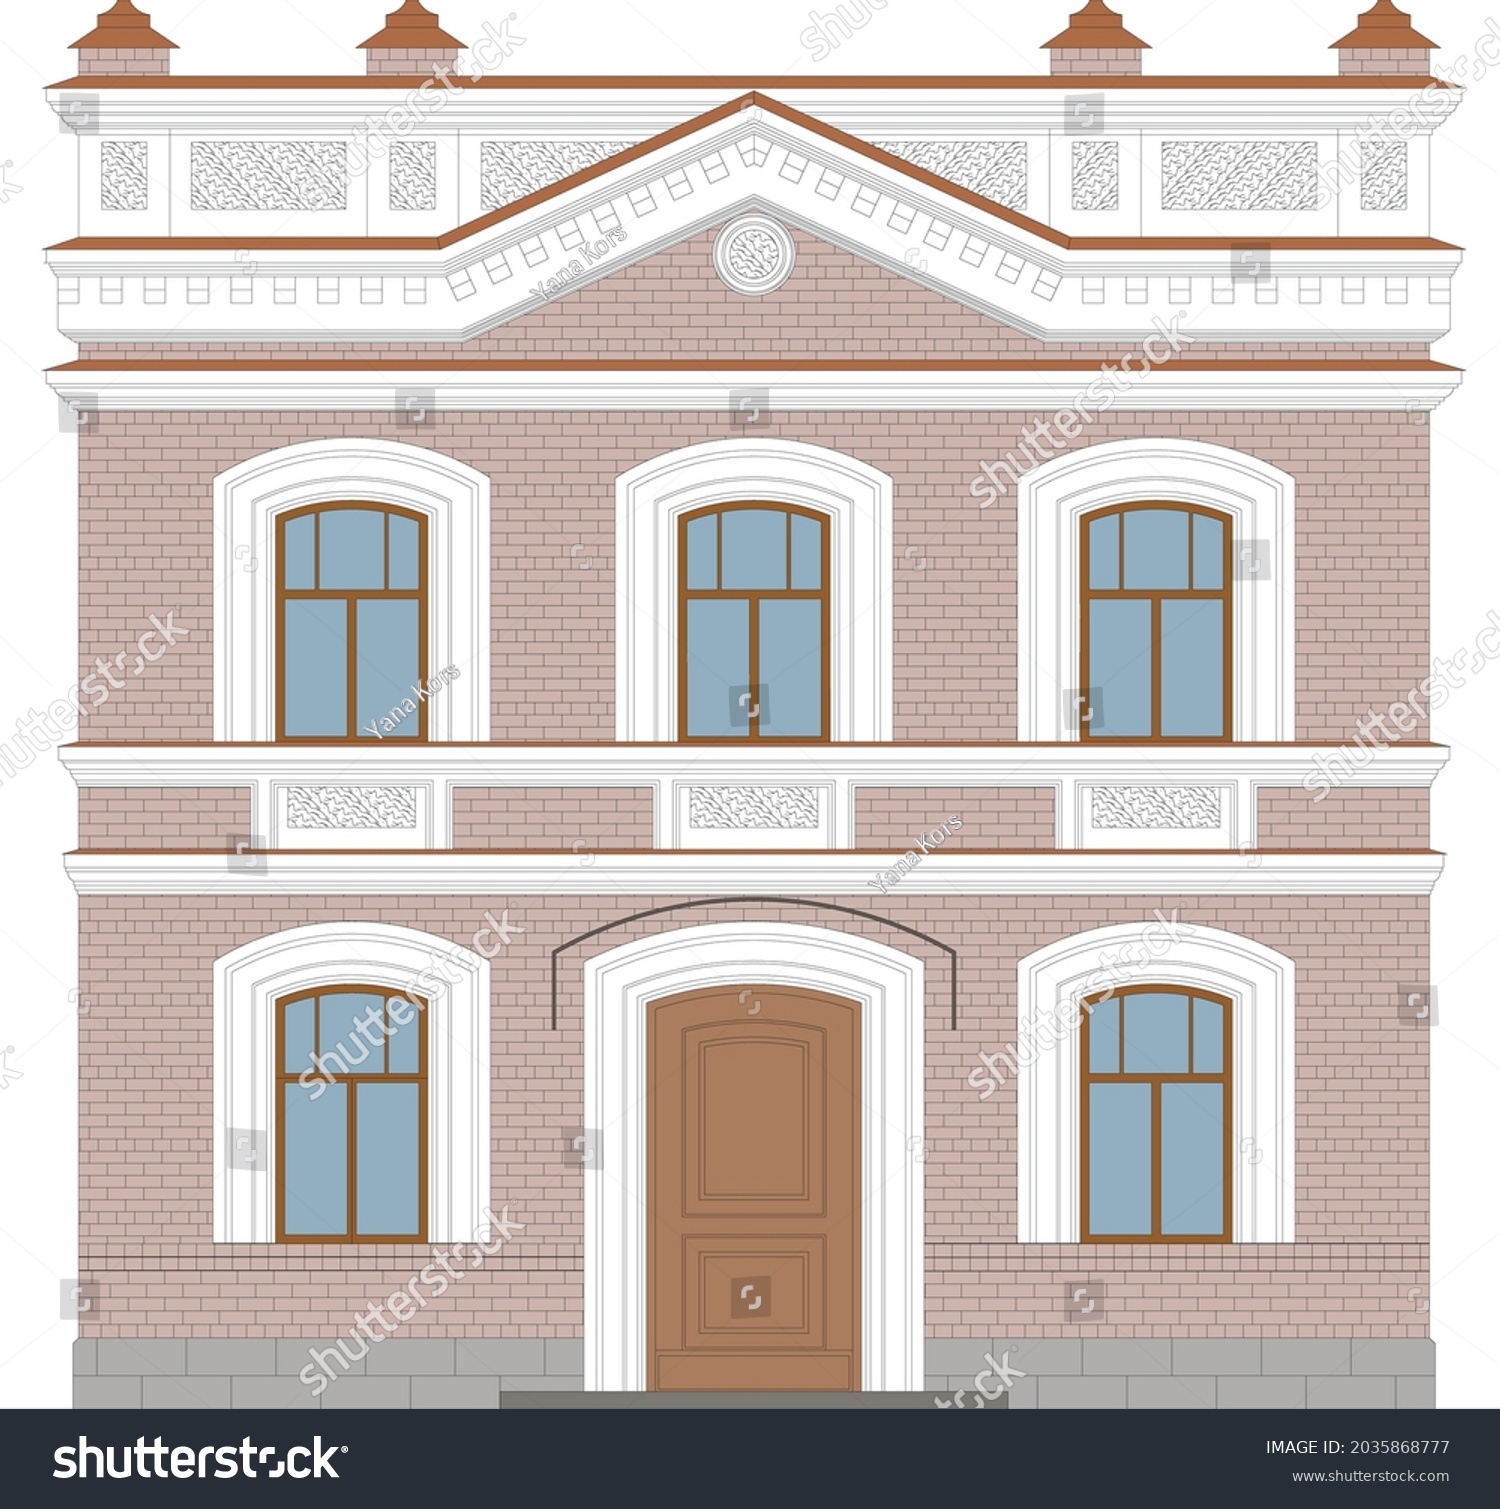 SVG of The facade of a historical building from about the 18th-19th century.Ural Federal District. Russia. A low-rise, brick building. Architectural sketch. A variant of the facade reconstruction. svg